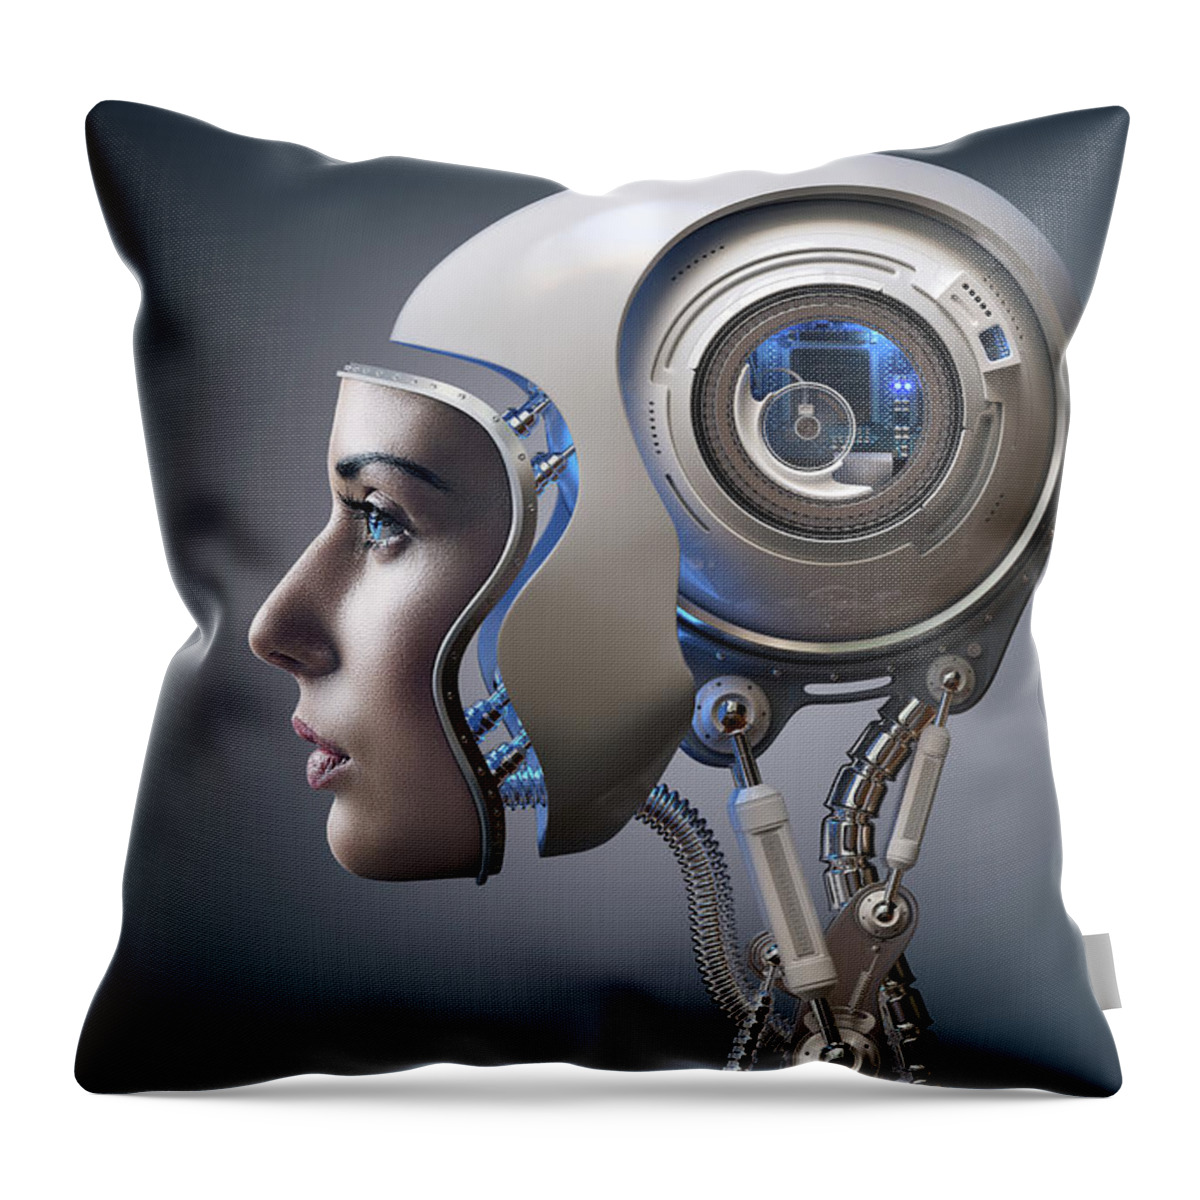 Cyborg Throw Pillow featuring the photograph Next Generation Cyborg by Johan Swanepoel